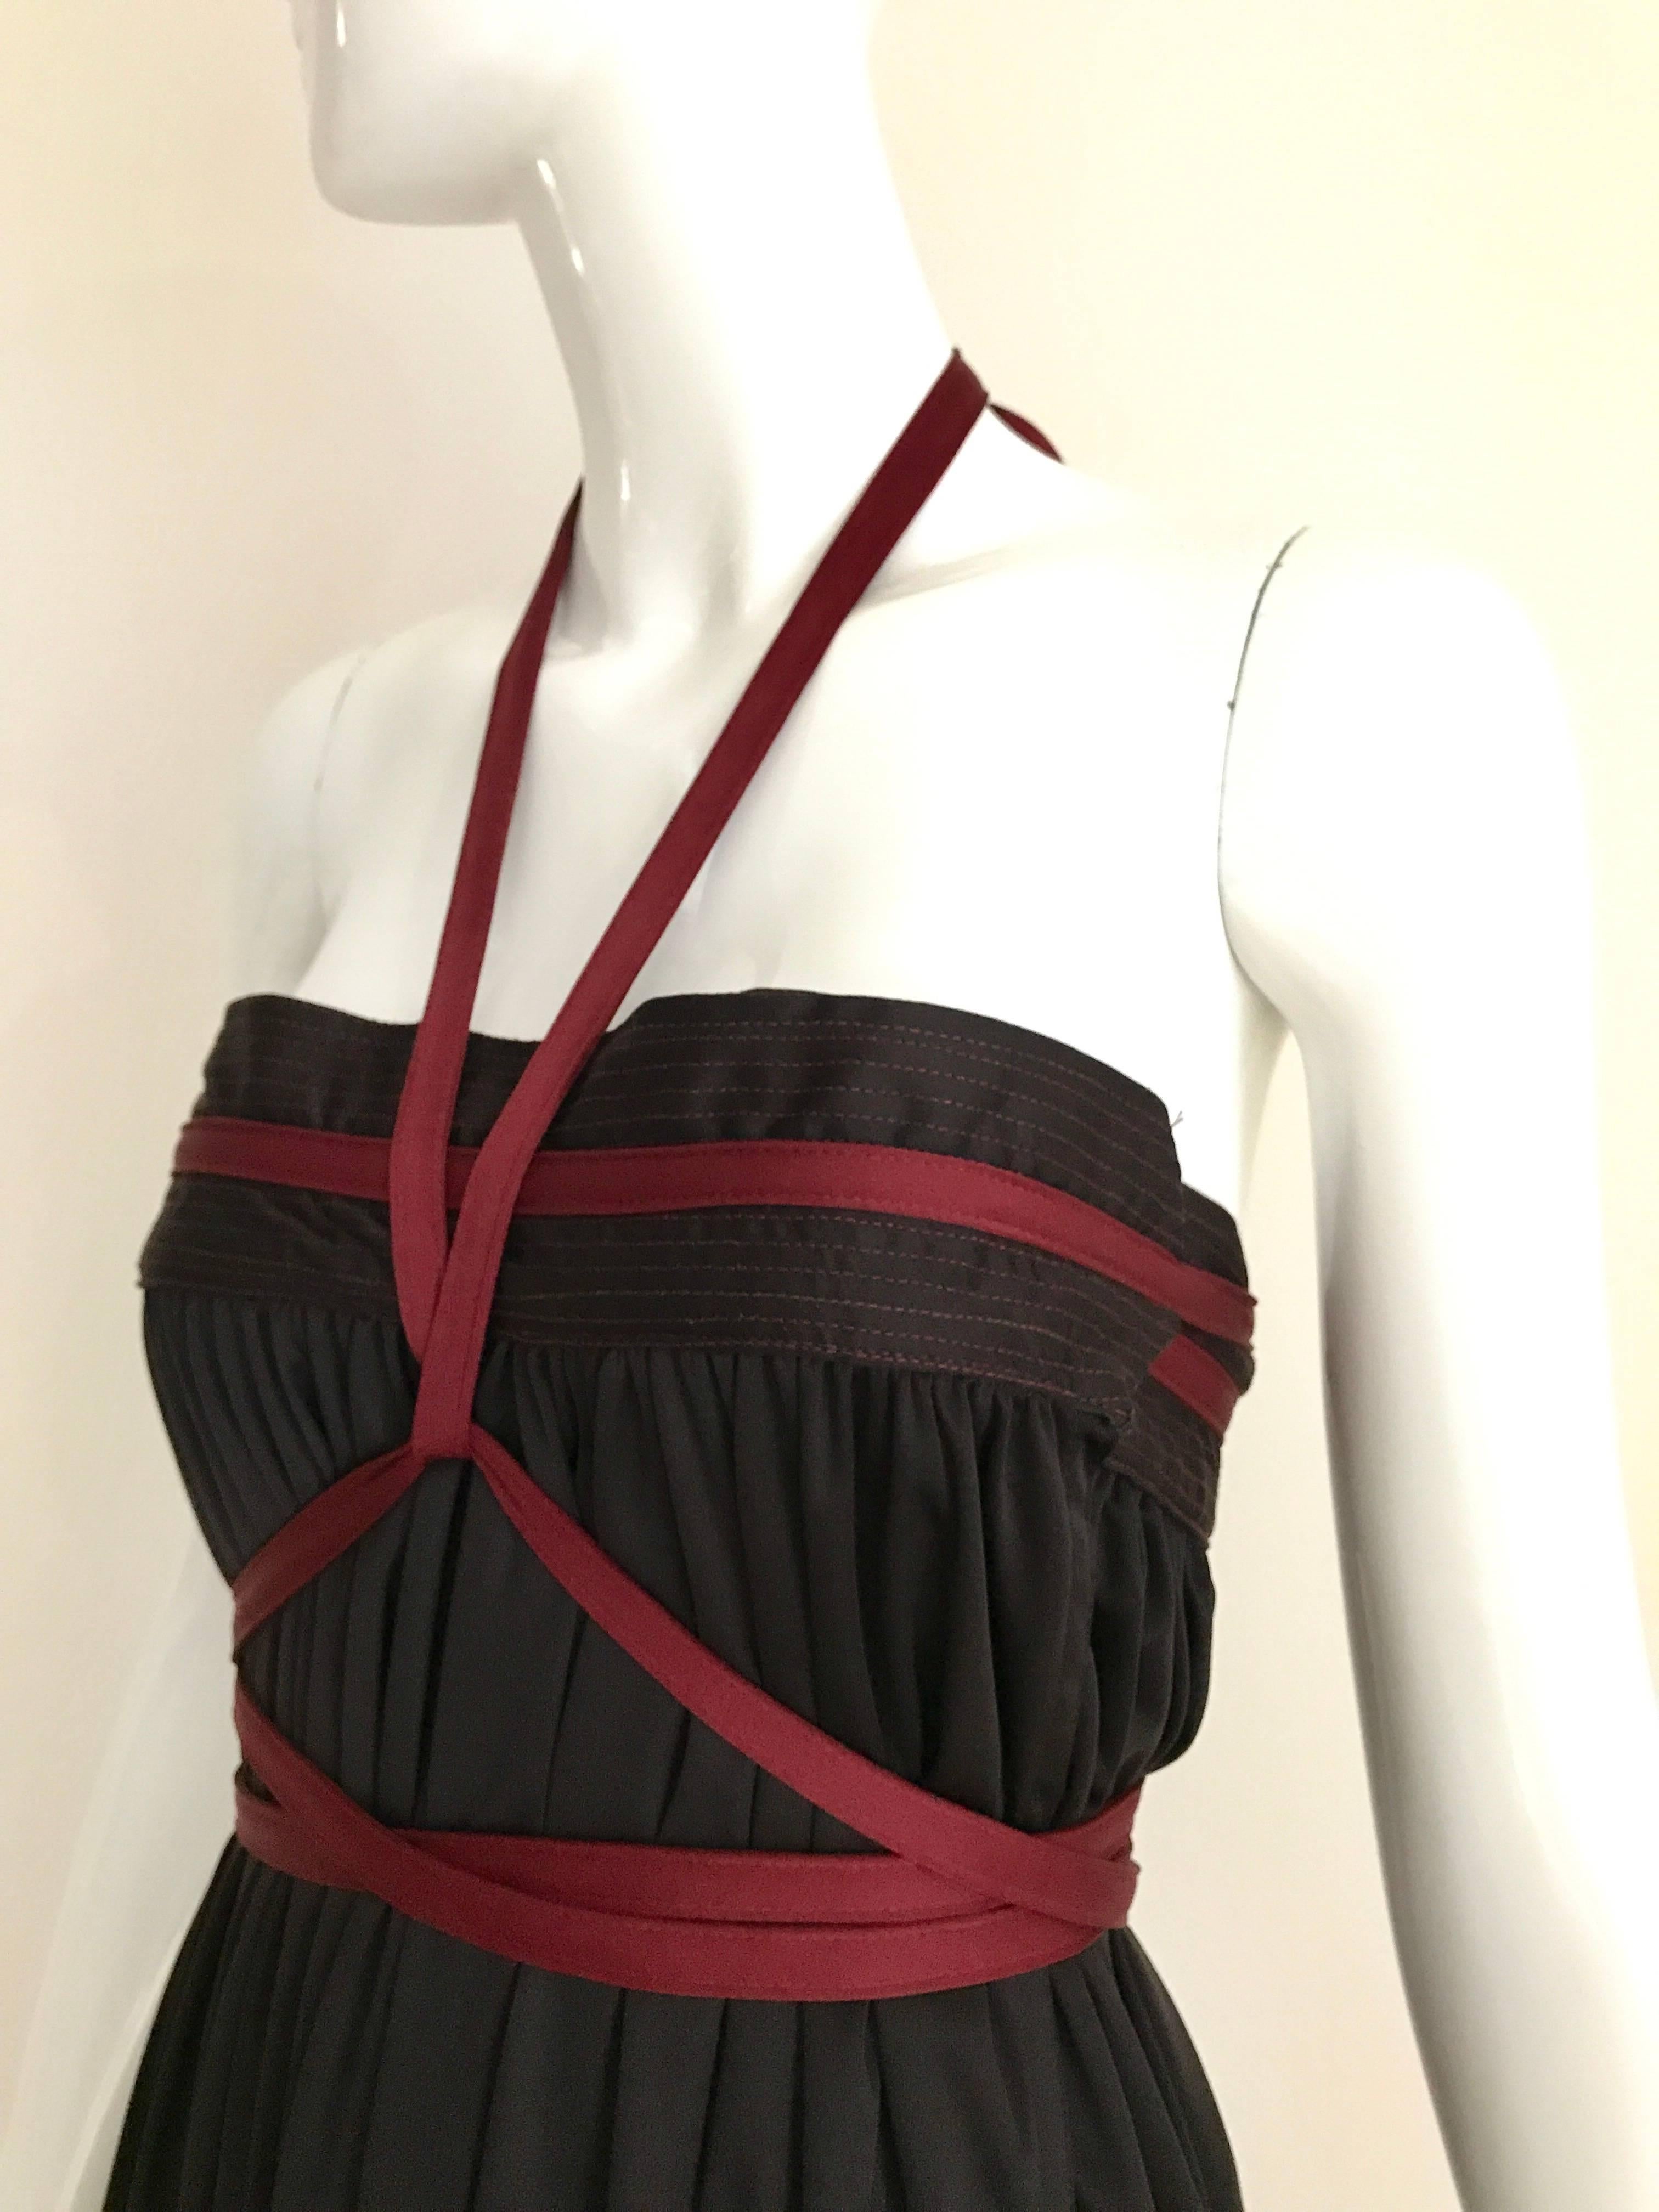 Vintage Geoffrey Beene Qiana Brown burgundy red knit strapless dress with long sash.  Dress can be worn as a maxi skirt. Dress has hidden pocket.
Skirt is styled with Gianfranco Ferre Knit top available at my 1stdibs store
Fit most sizes from